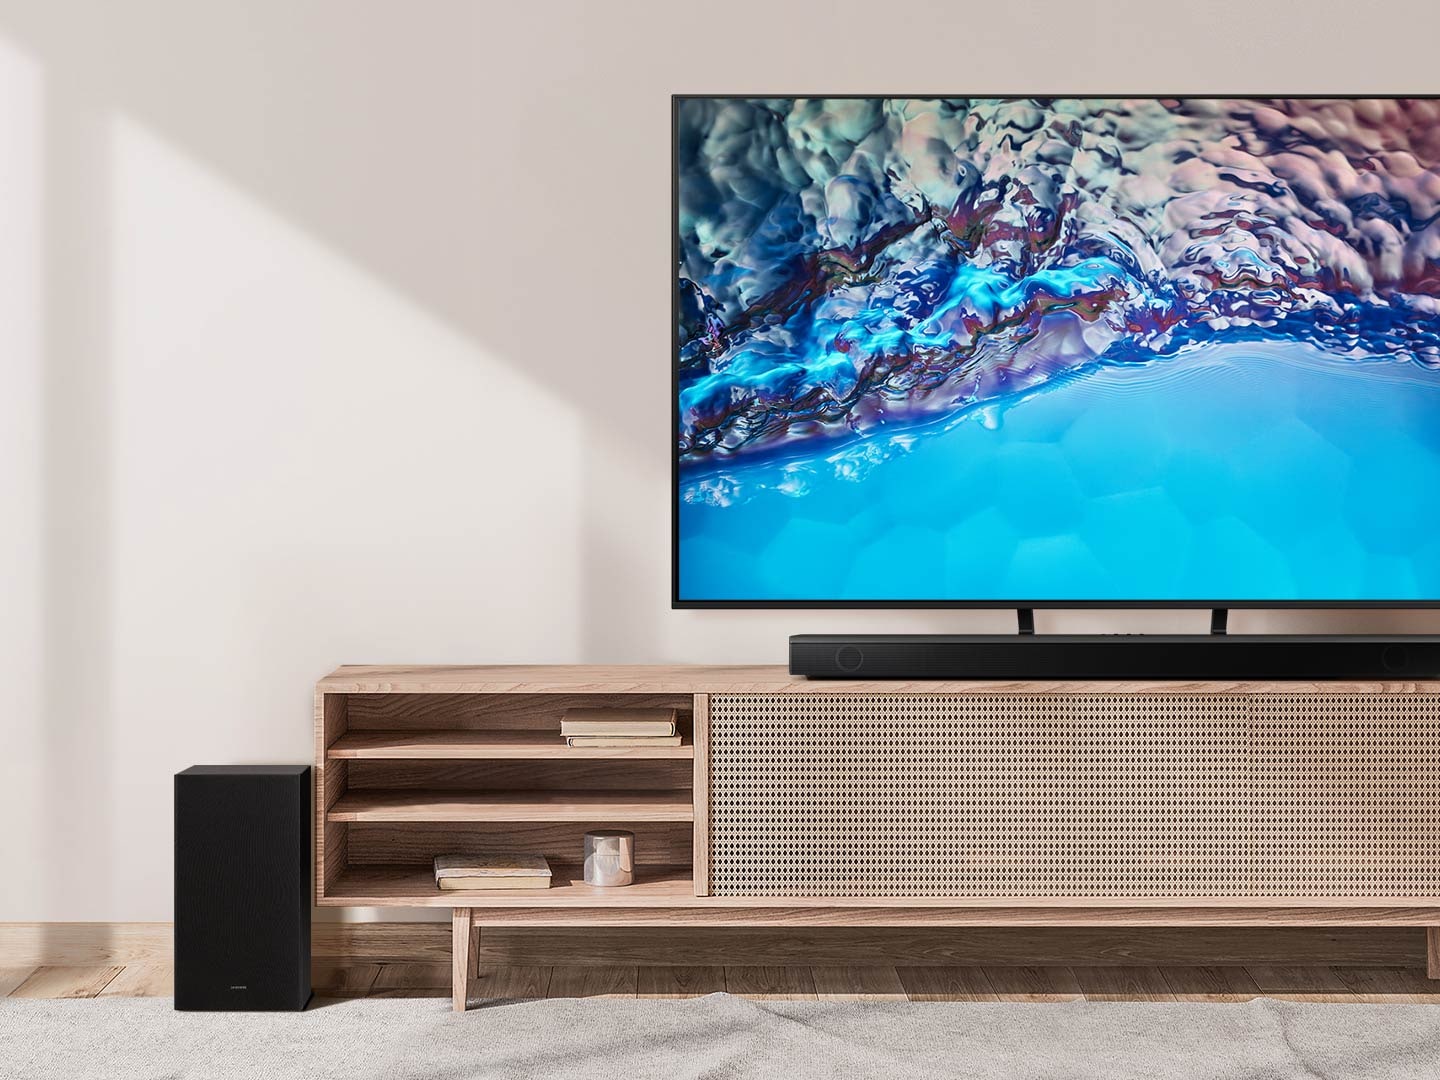 Samsung B series Soundbar and subwoofer are positioned with Crystal UHD TV on living room cabinet.